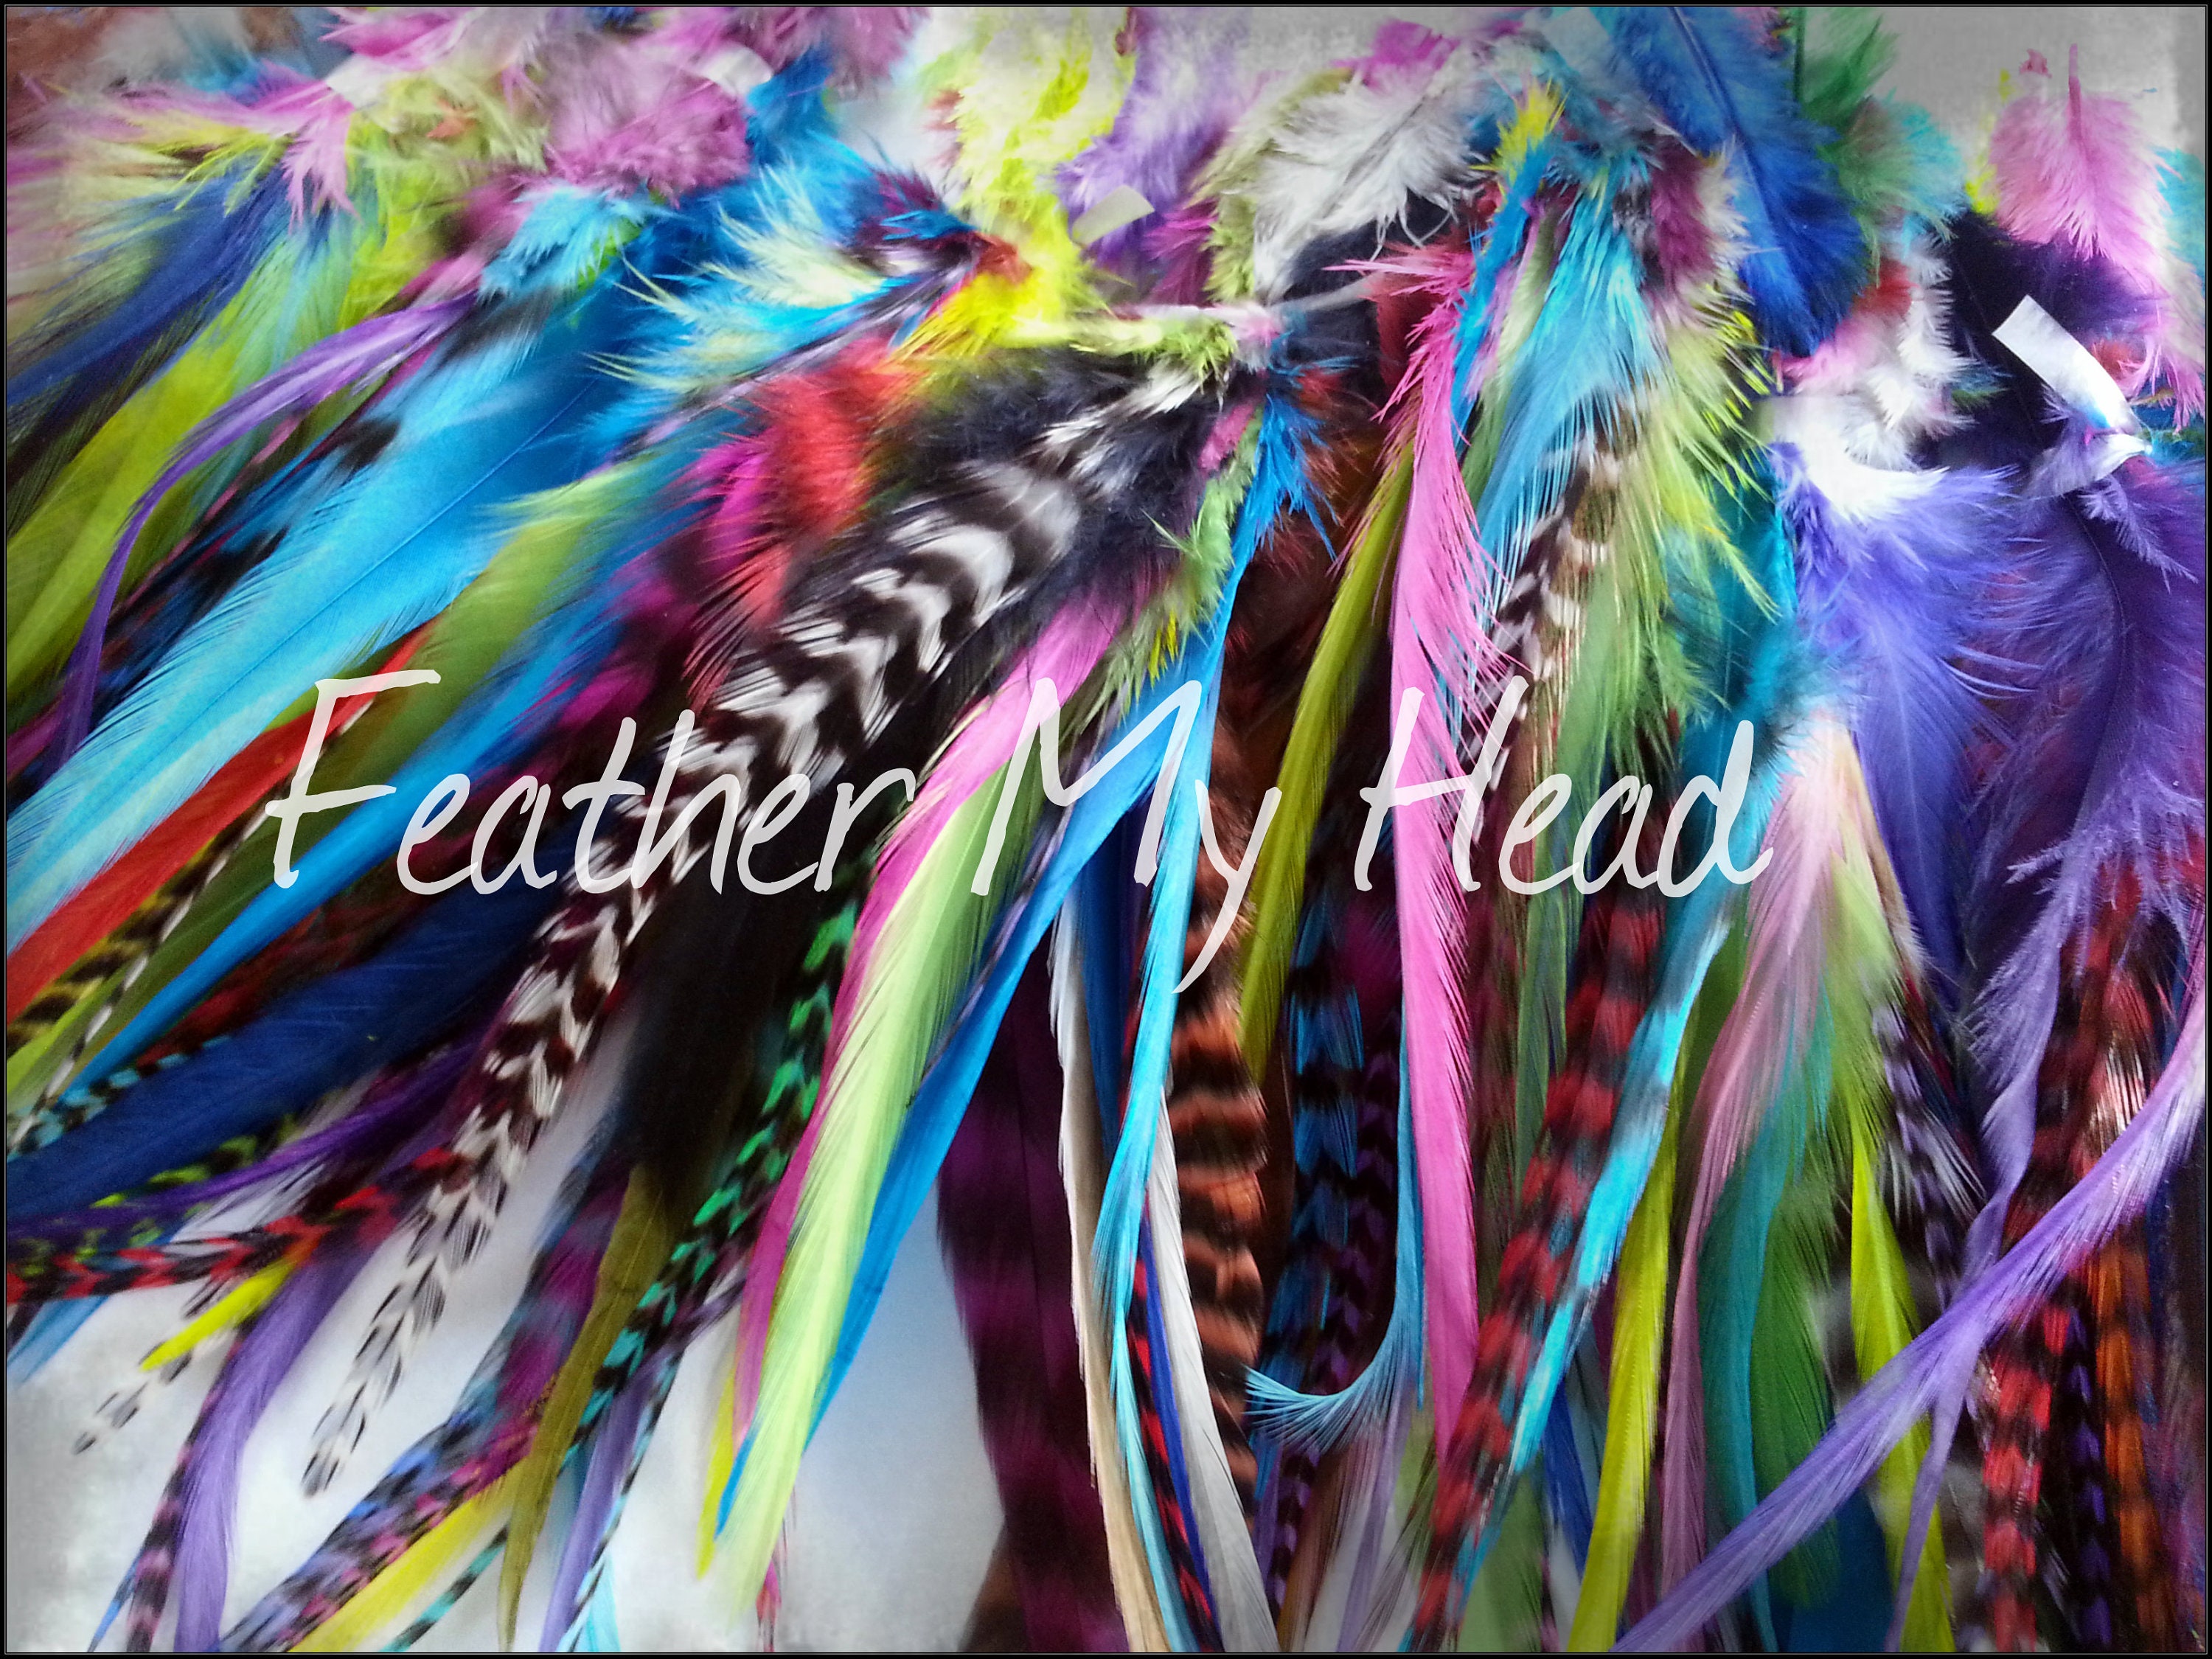 25 Feather Hair Extension DIY Kit with Beads, 1 Threader and Instructions. Surprise Mix of Natural Colored 8-12 Feather Extensions.